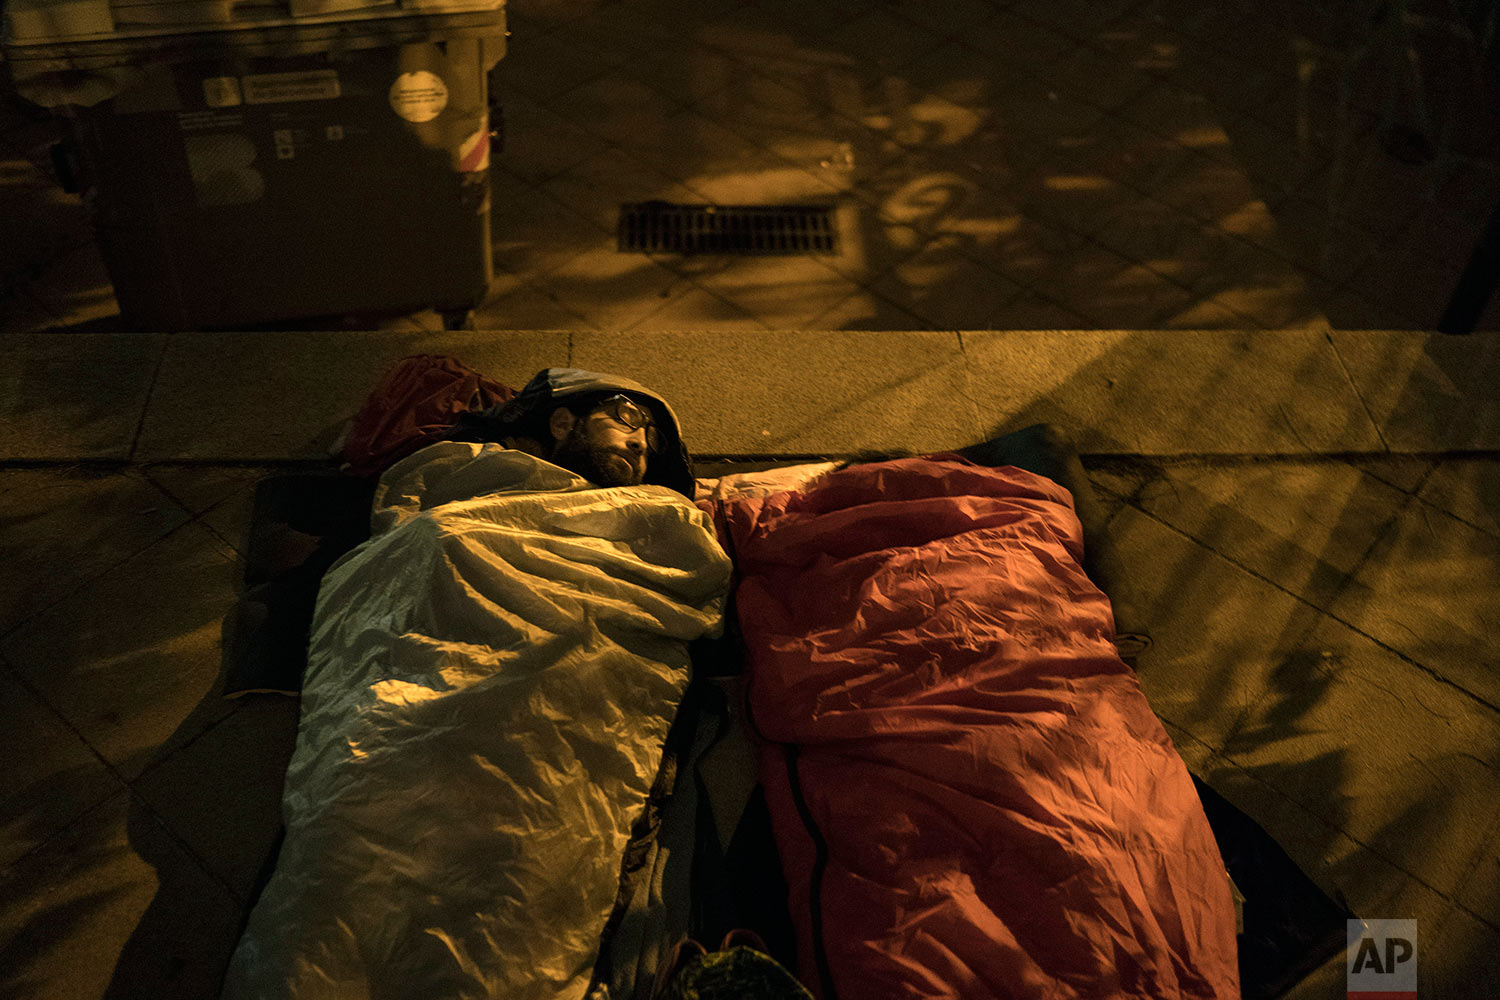  Pro-referendum supporters sleep at the yard of the Escola Industrial, a school listed to be a polling station by the Catalan government, in Barcelona, Spain, Sunday, Oct. 1, 2017. Catalan pro-referendum supporters vowed to ignore a police ultimatum 